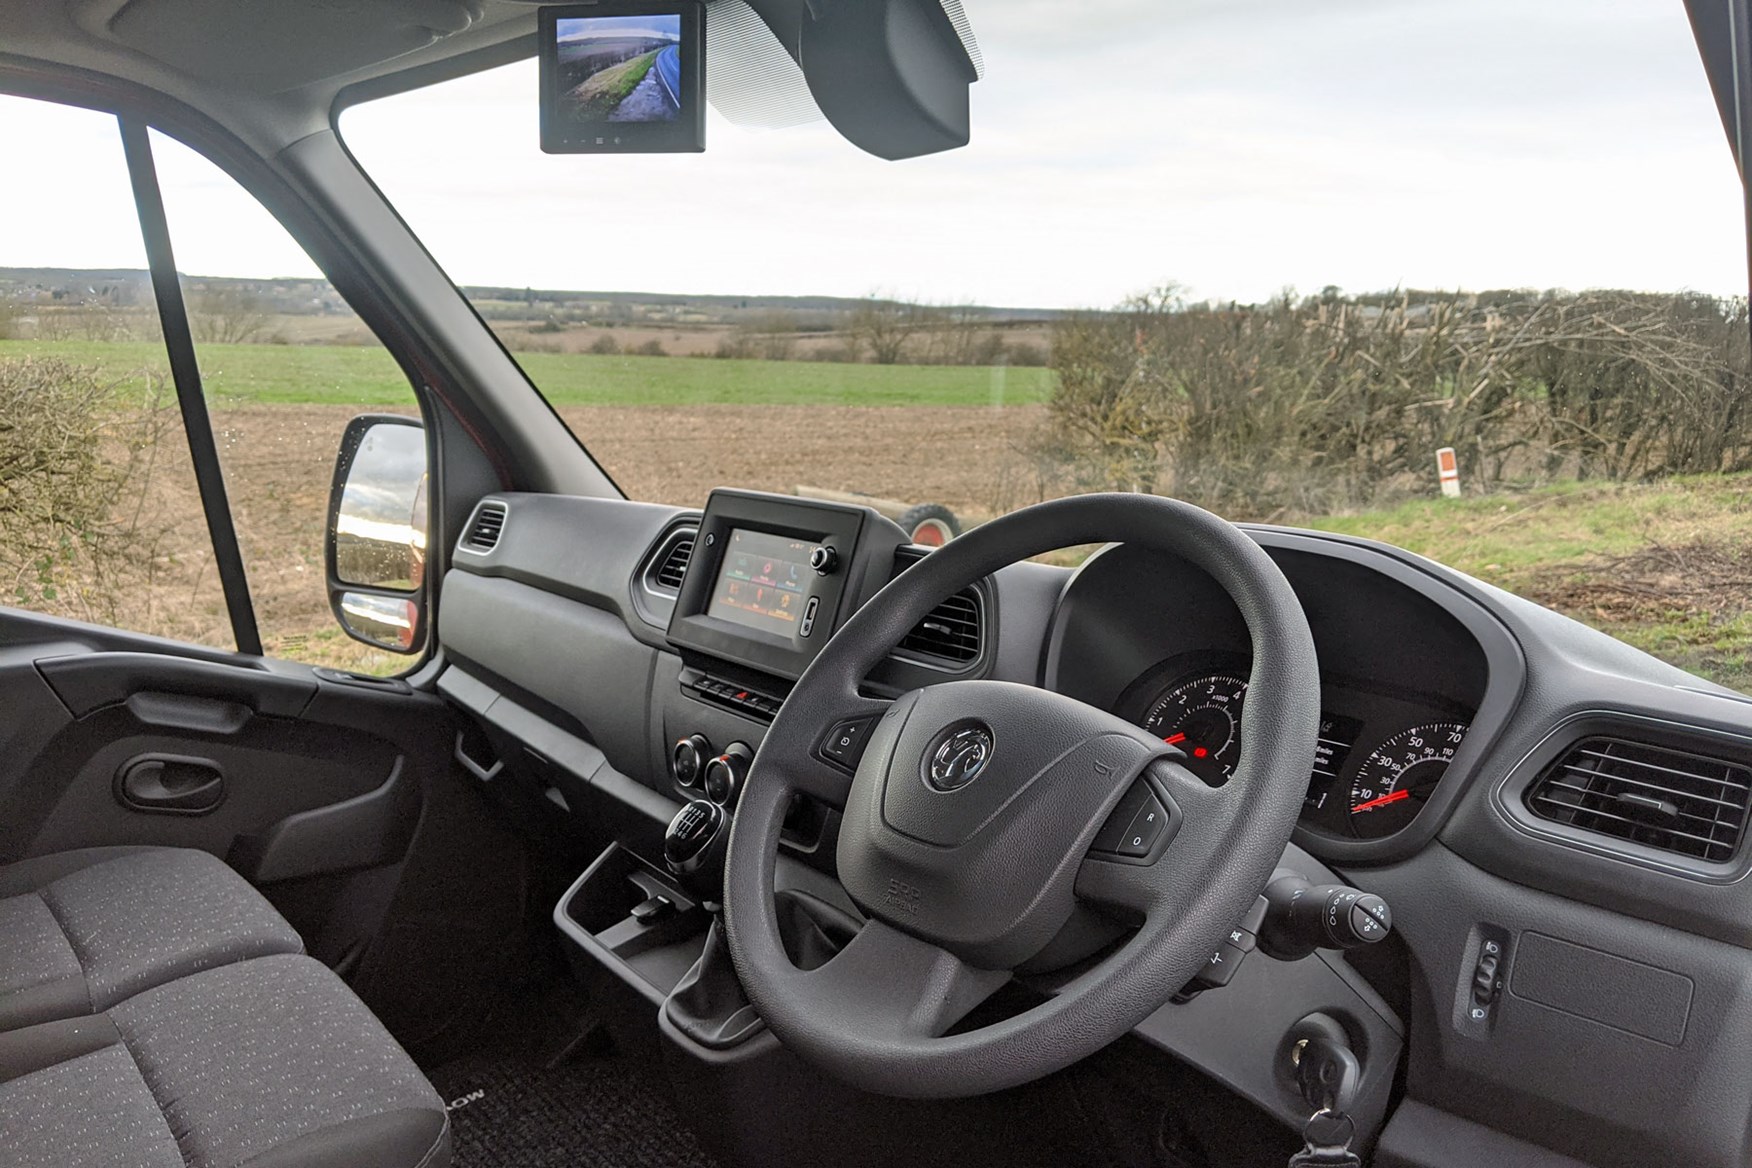 Vauxhall Movano 150hp FWD review - cab interior, steering wheel, dashboard, 2020